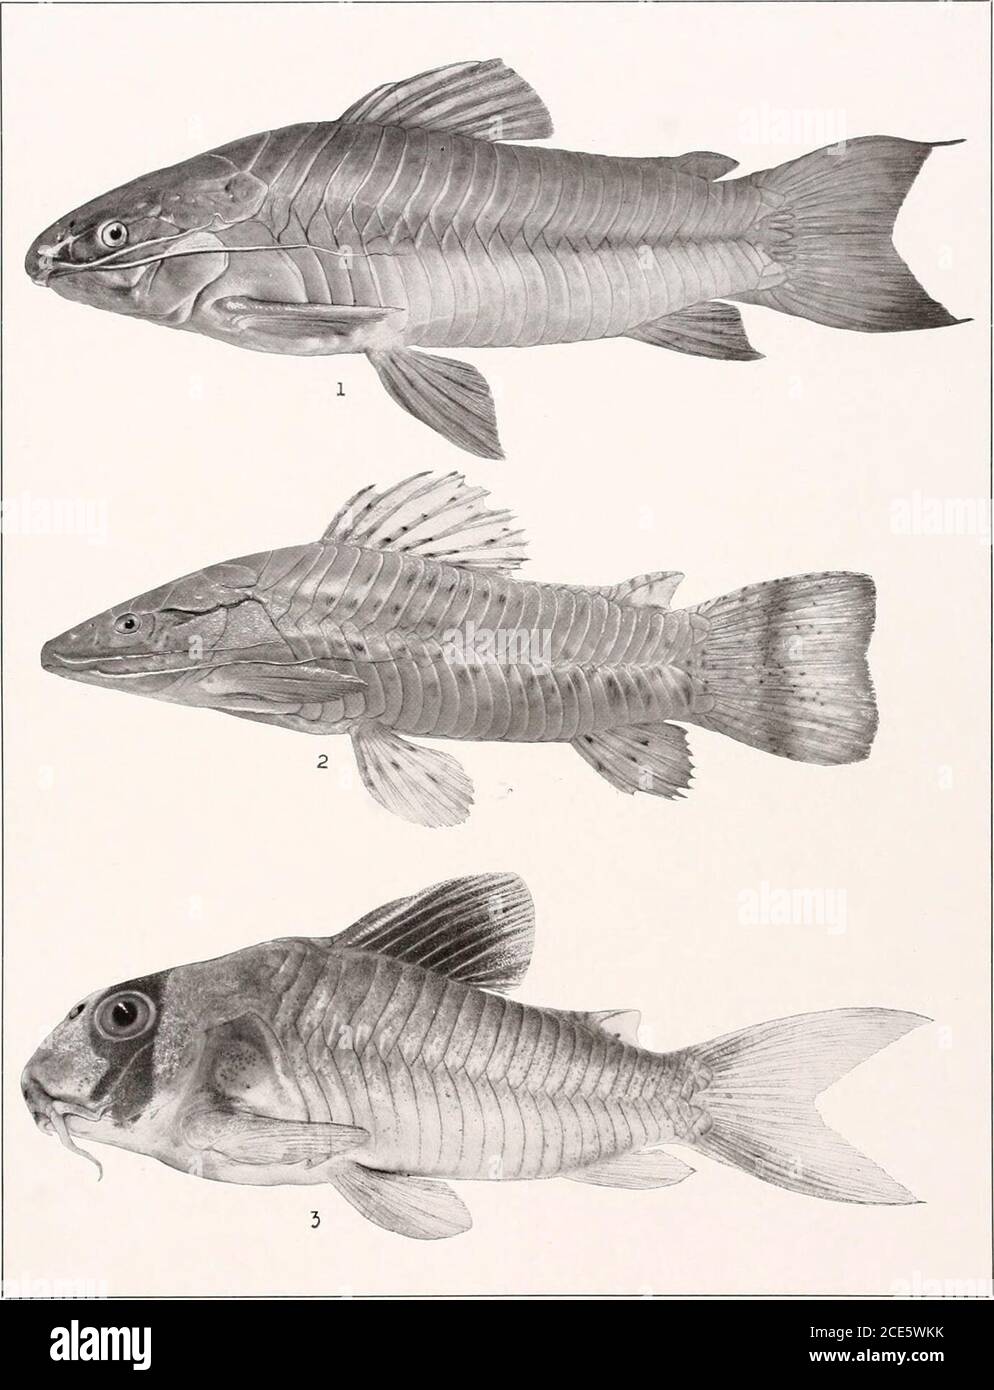 . The freshwater fishes of British Guiana, including a study of the ecological grouping of species and the relation of the fauna of the plateau to that of the lowlands . GO IN o zz z H cH s5 o zz sz aa W w Memoirs Carnegie Museum, Vol. V. Plate XXIV.. 1. Hoplosternum littarale (Hancock). 192 mm. No. 1575. 2. Hoplosternum thoracatum (Cuvier andValenciennes). 110 mm. No. 1579 3. Corydoras pundatus (Bloch). 51mm. No. 1561. Memoirs Carnegie Museum, Vol. V. Plate XXV. Stock Photo